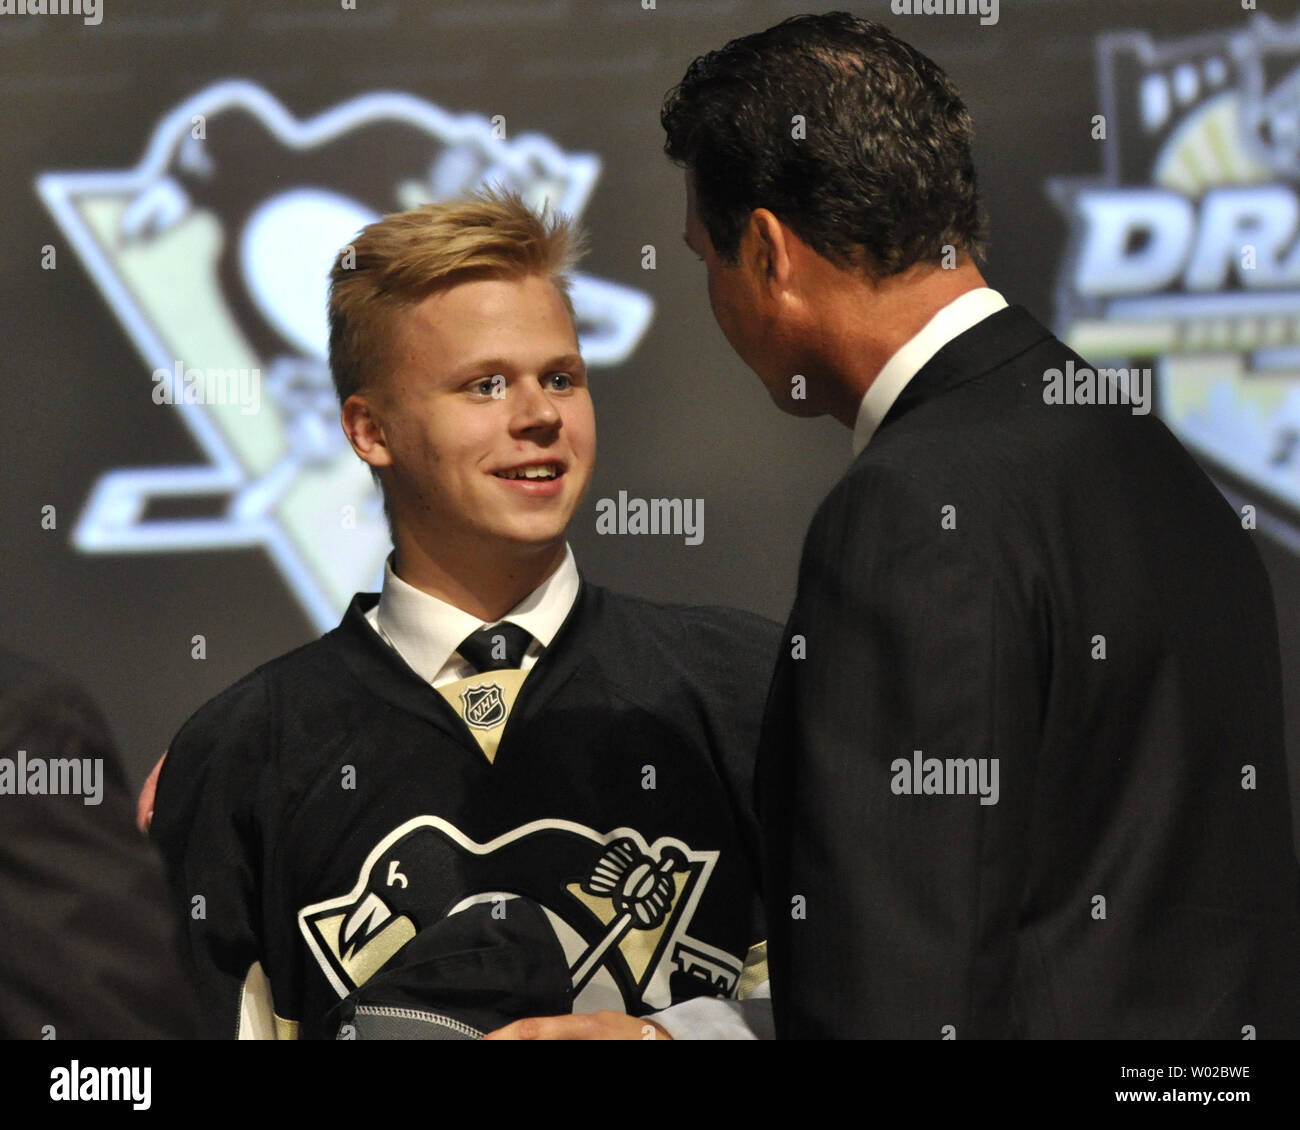 Olli Maatta, of London, England shakes hands with Pittsburgh